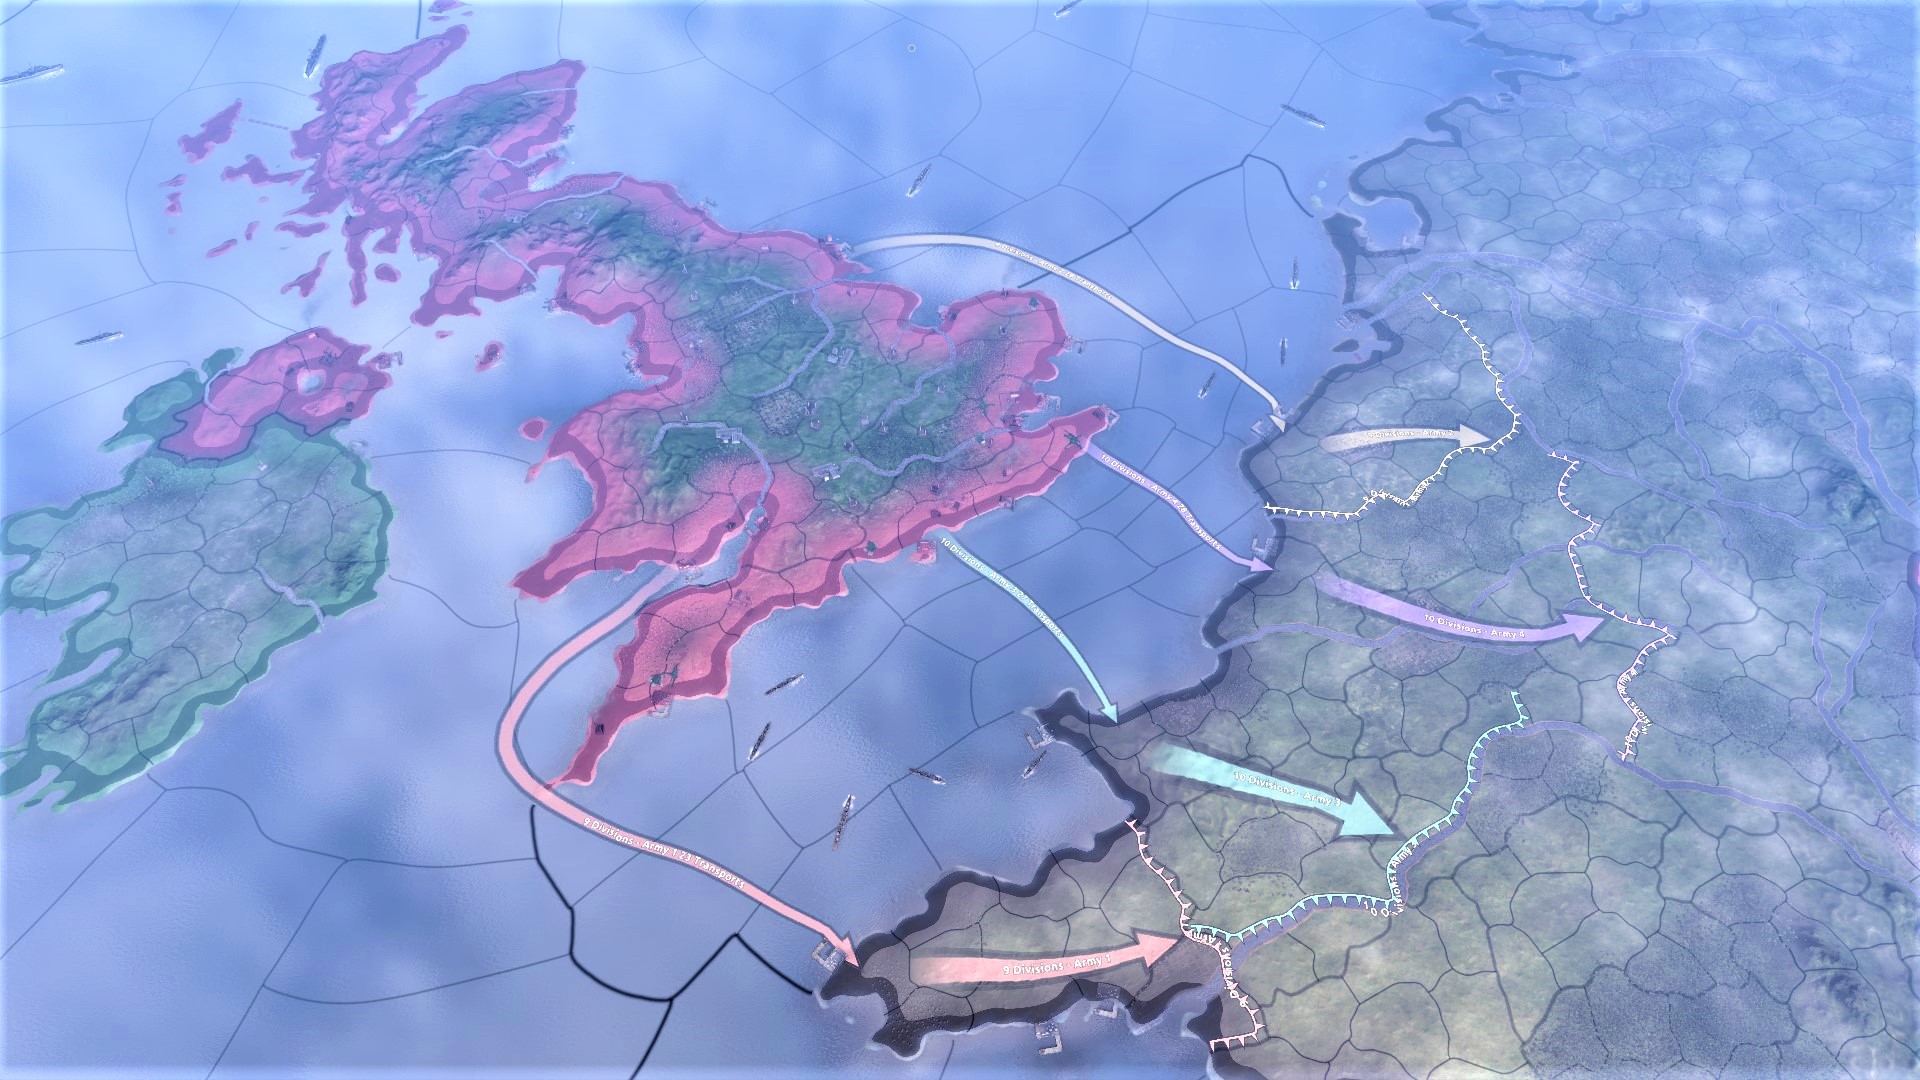 HOI4 Dev Diary - Combat and Stats changes